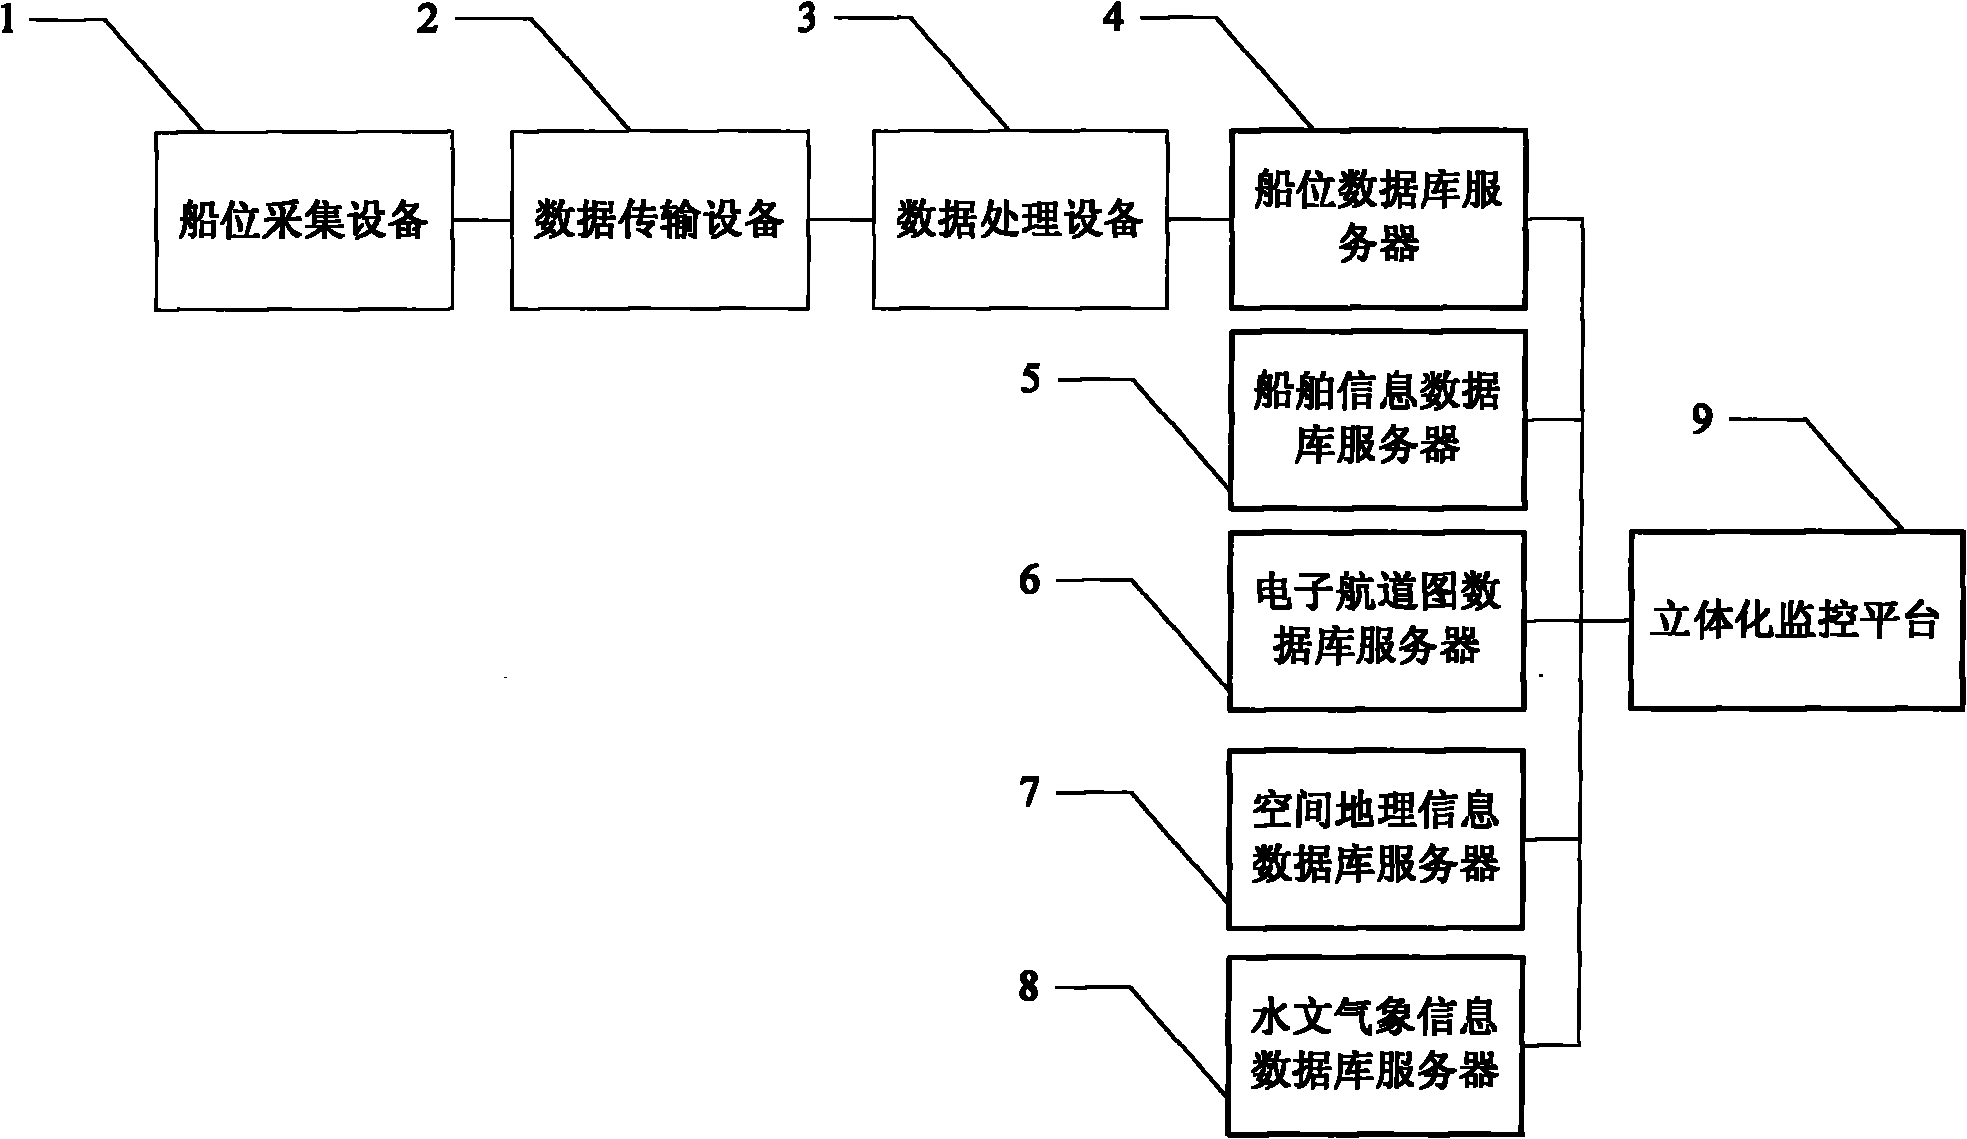 Monitoring system and monitoring method for ships in typical sections of Three Gorges Reservoir